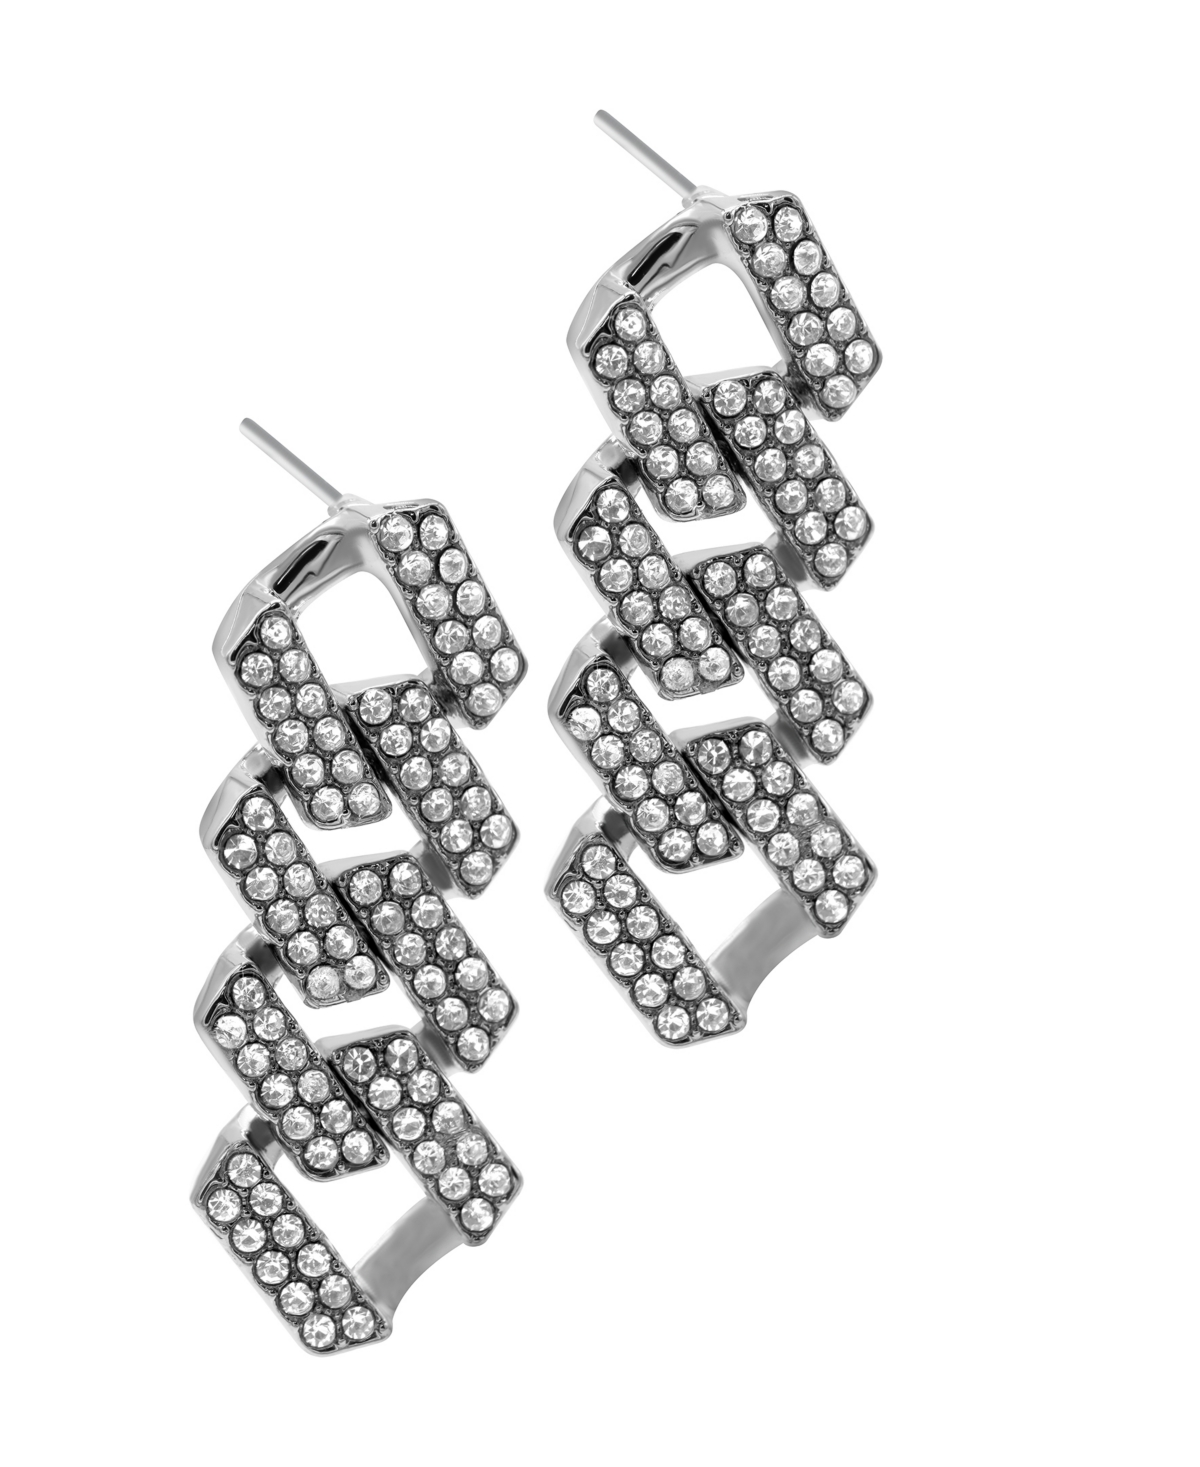 Silver-Plated Edgy Cuban Chain Crystal Drop Earrings - Silver